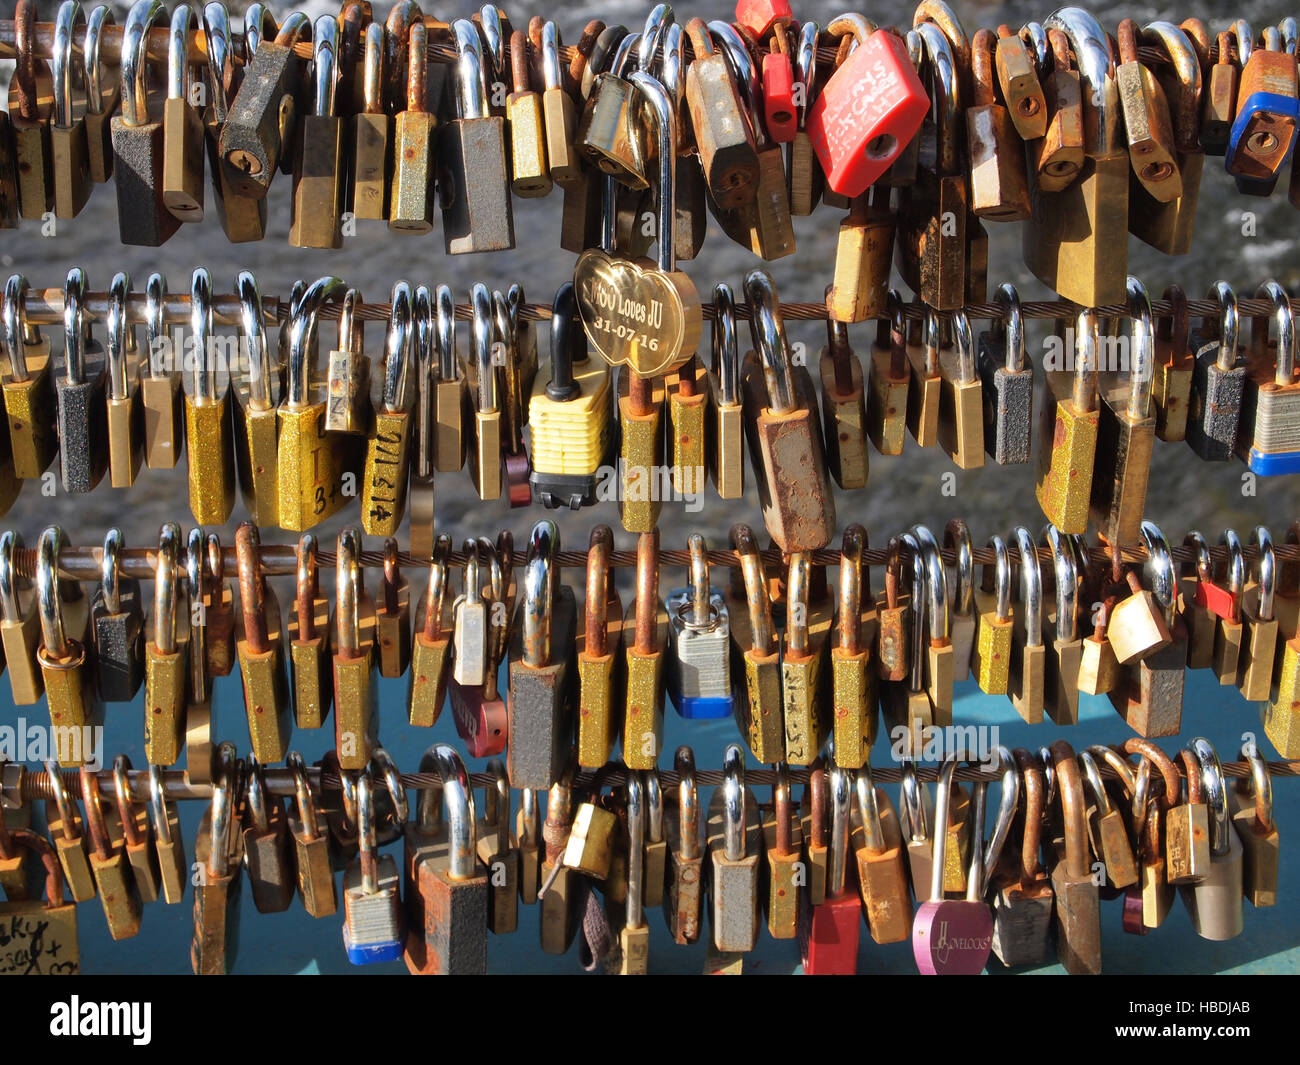 Locks on bridge that people have attached to show love for another, usually engraved or written on. They can break bridges! Stock Photo